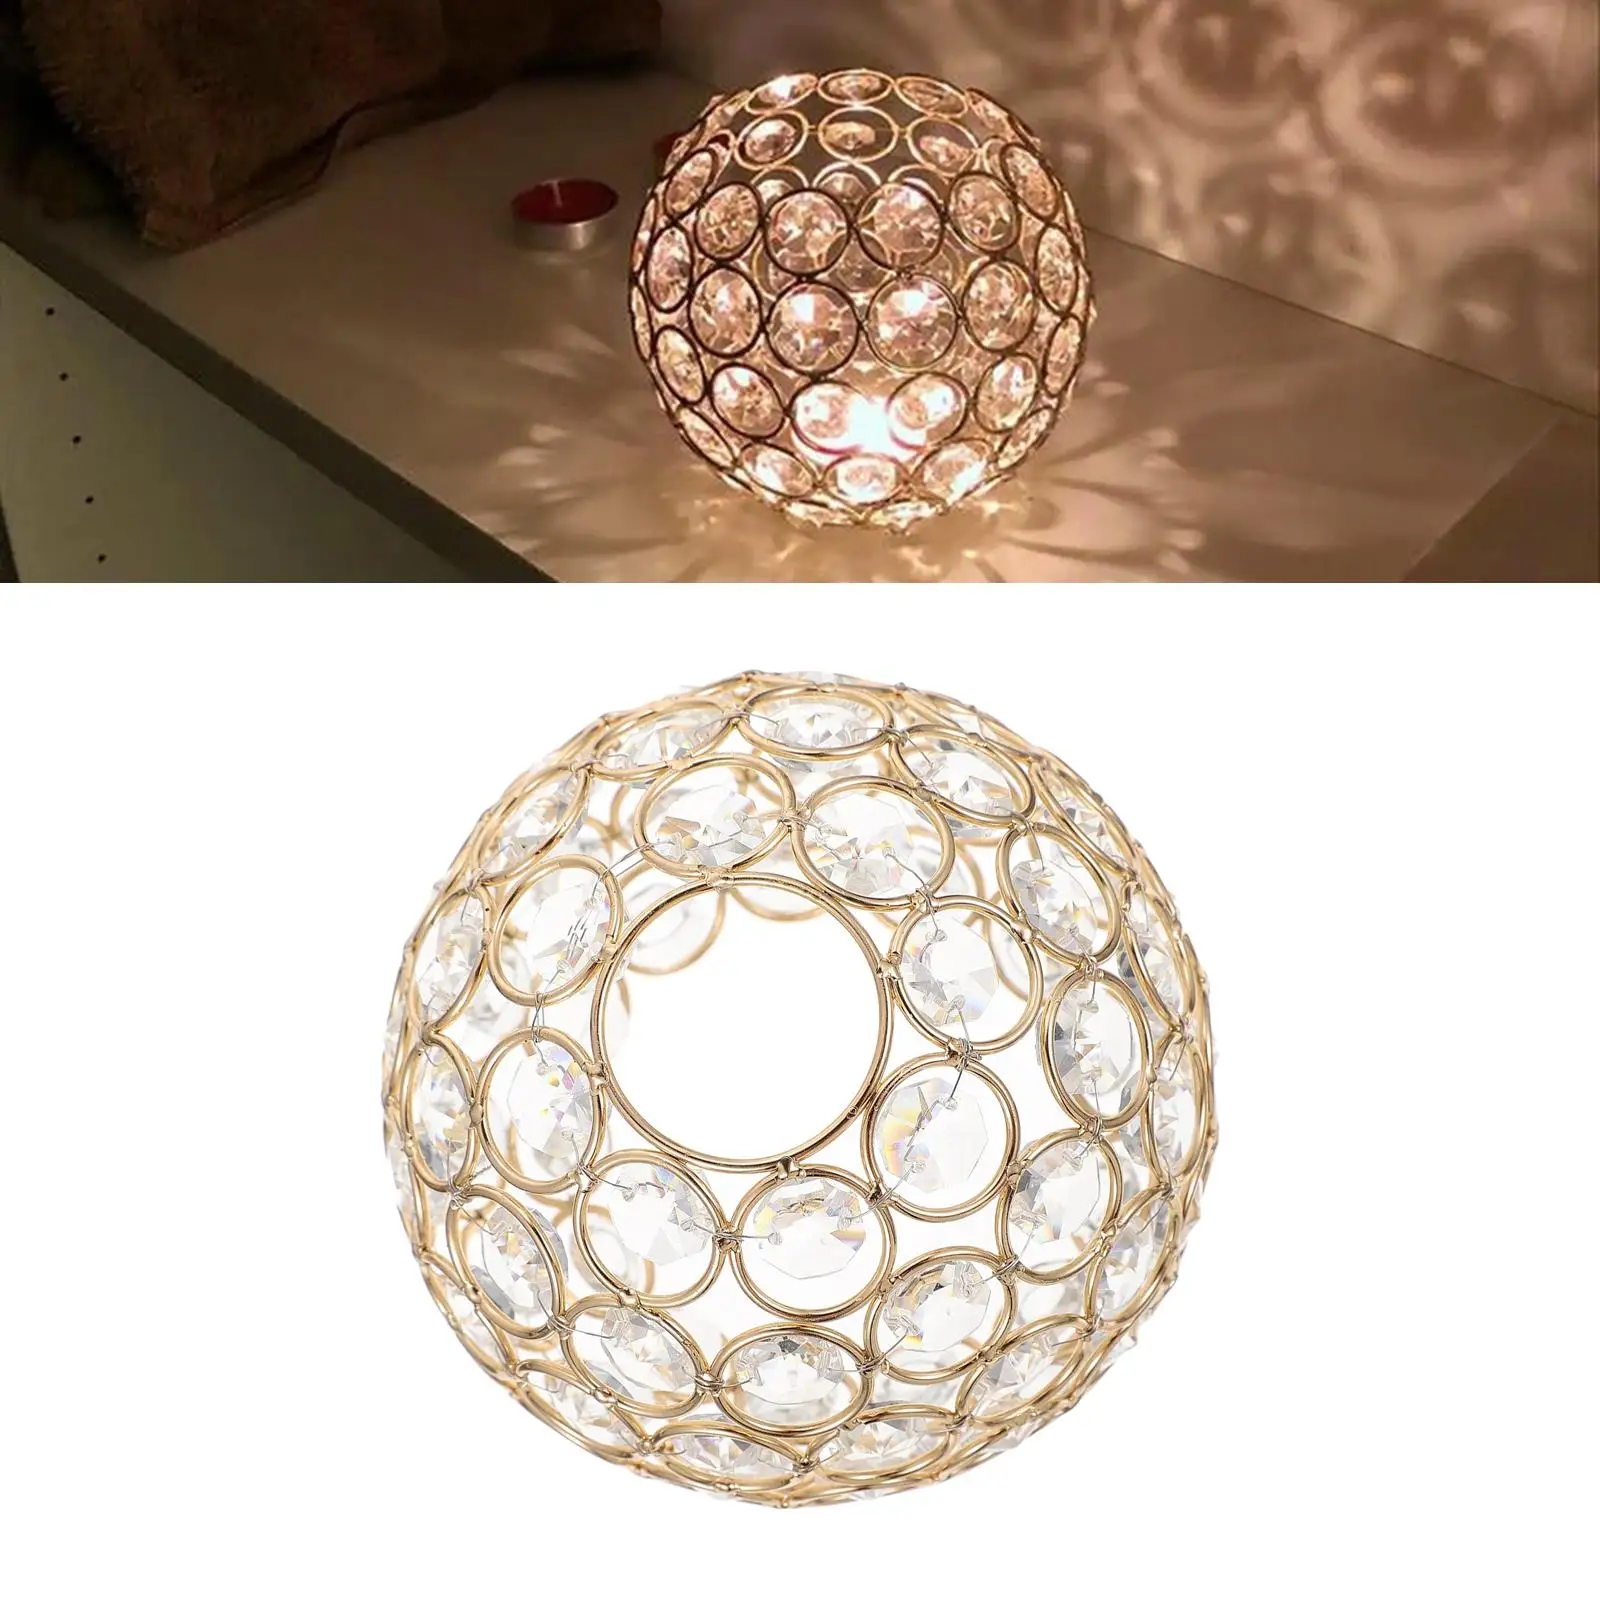 Classic Ceiling Light Shade Replacement Cover Office Crystal Lampshade Only